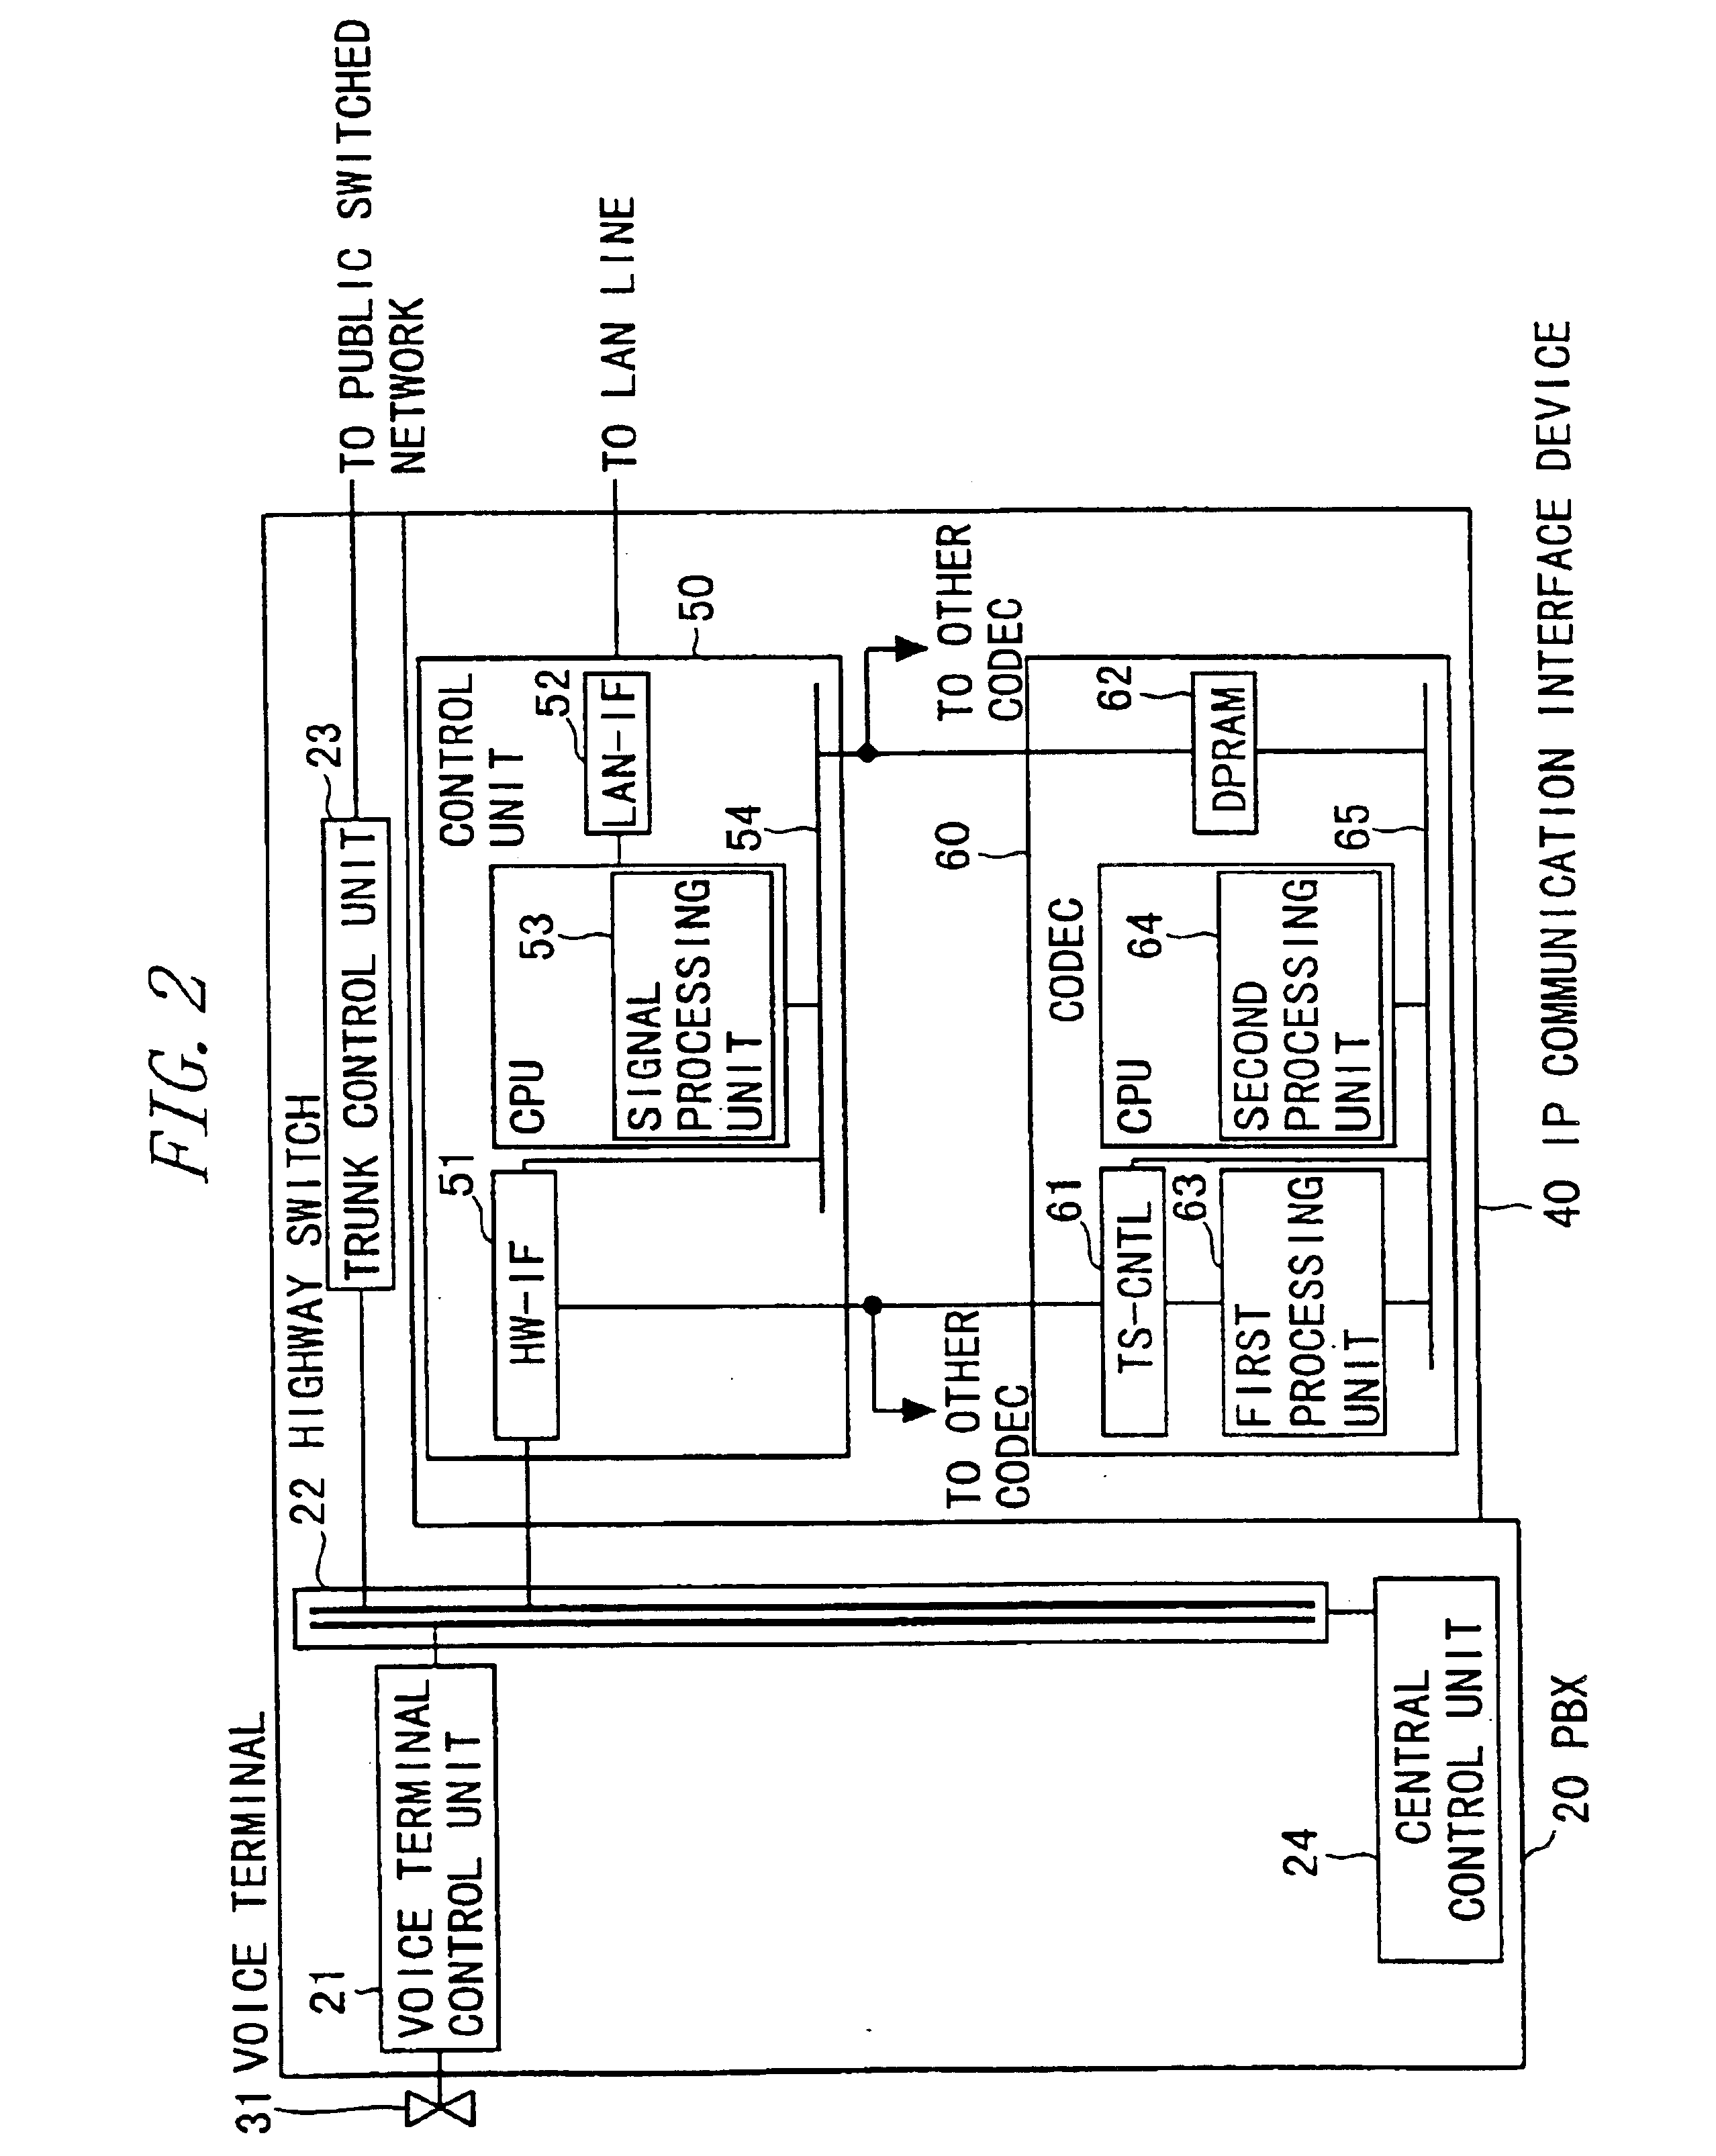 IP communication network system having a gateway function with communication protocol conversion between a switched circuit network and a packet switched network including data over tcp/ip and voice/fax over rtp